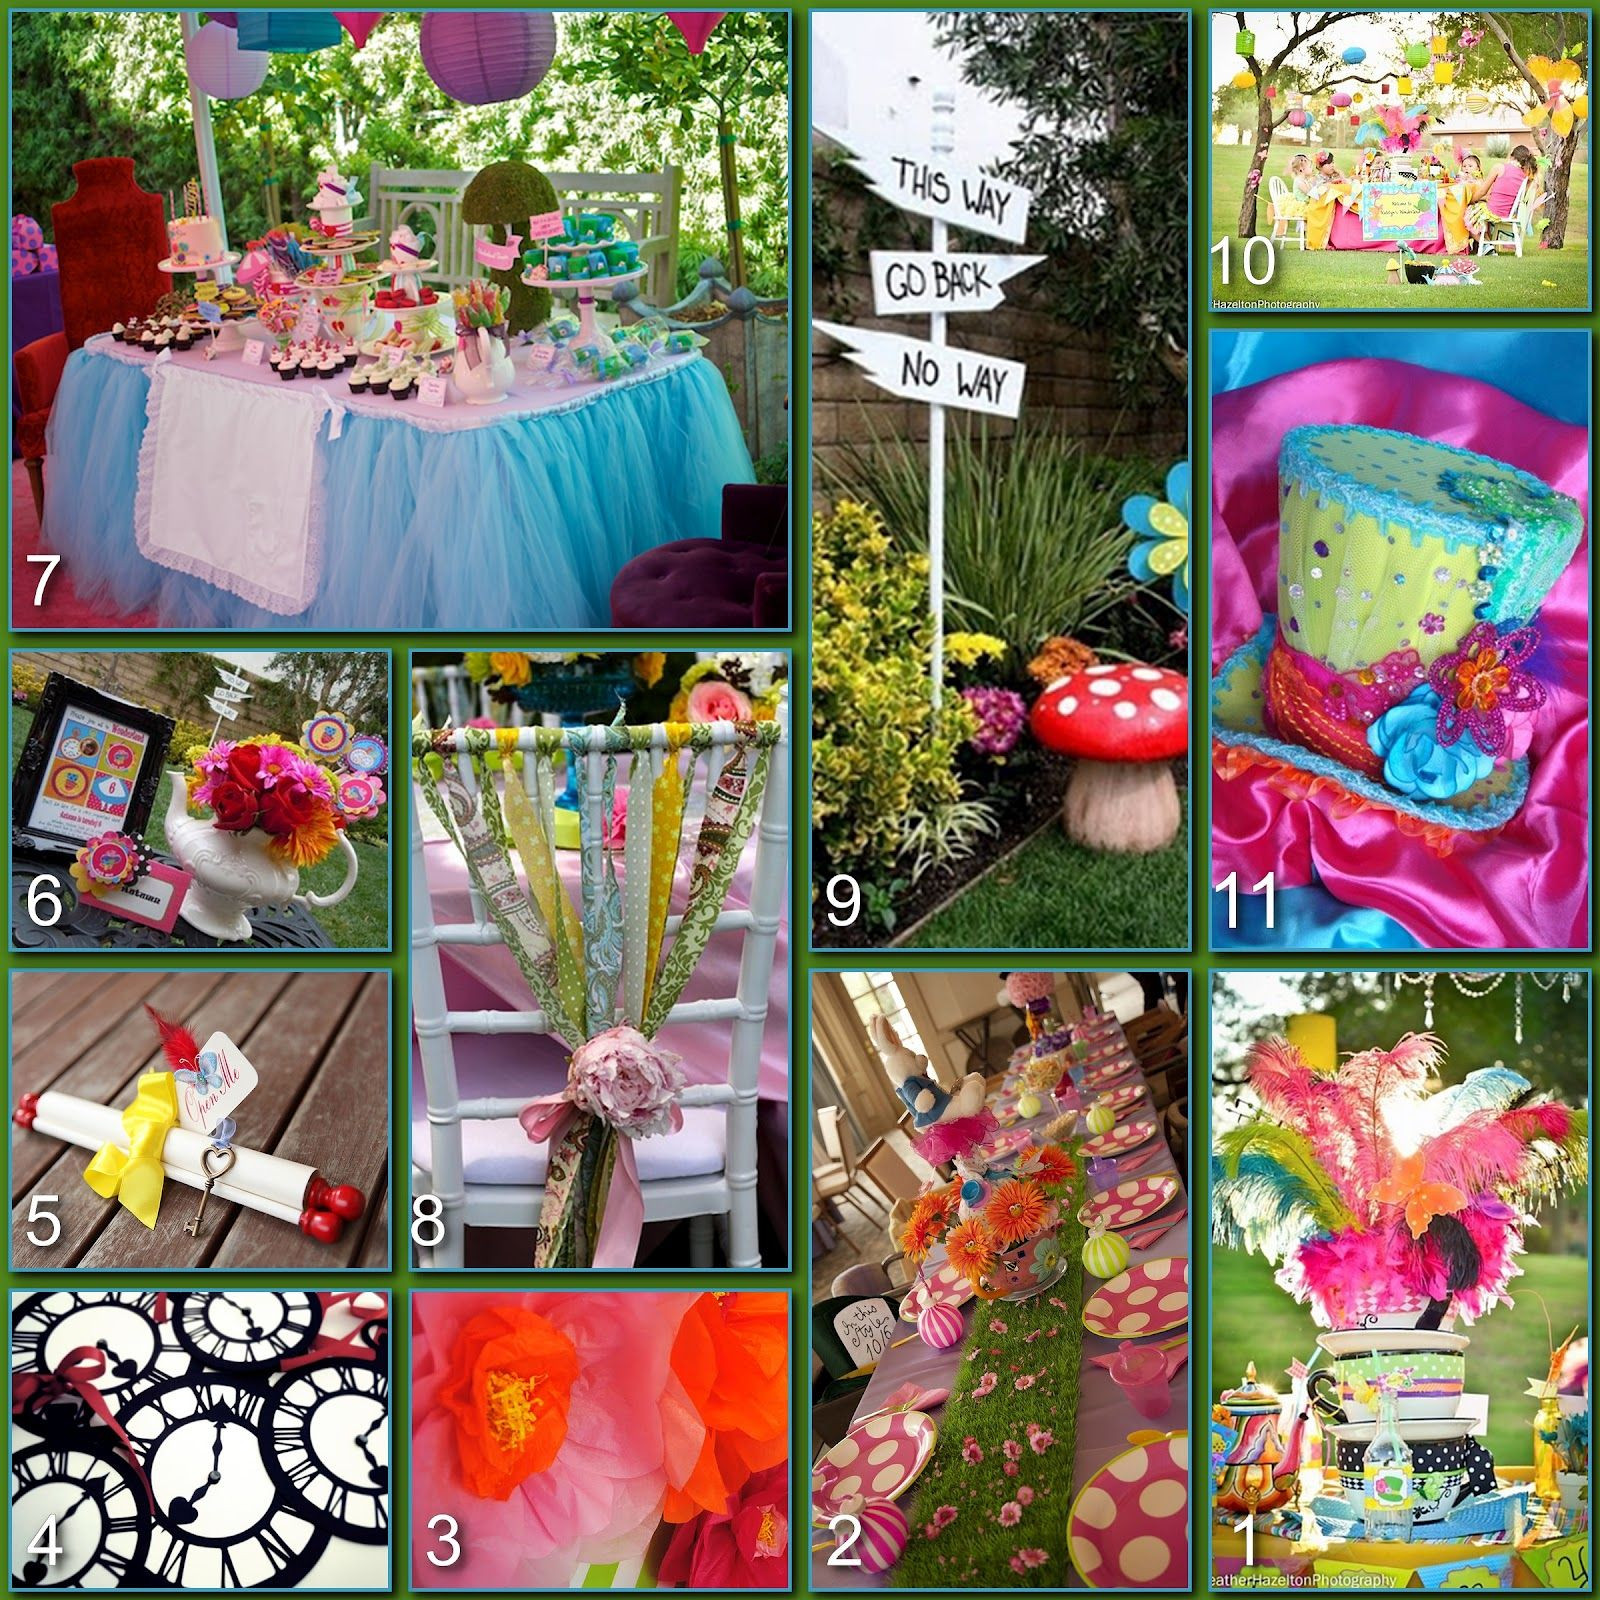 Mad Hatter Themed Tea Party Food Ideas
 Pin on Tea party birthday